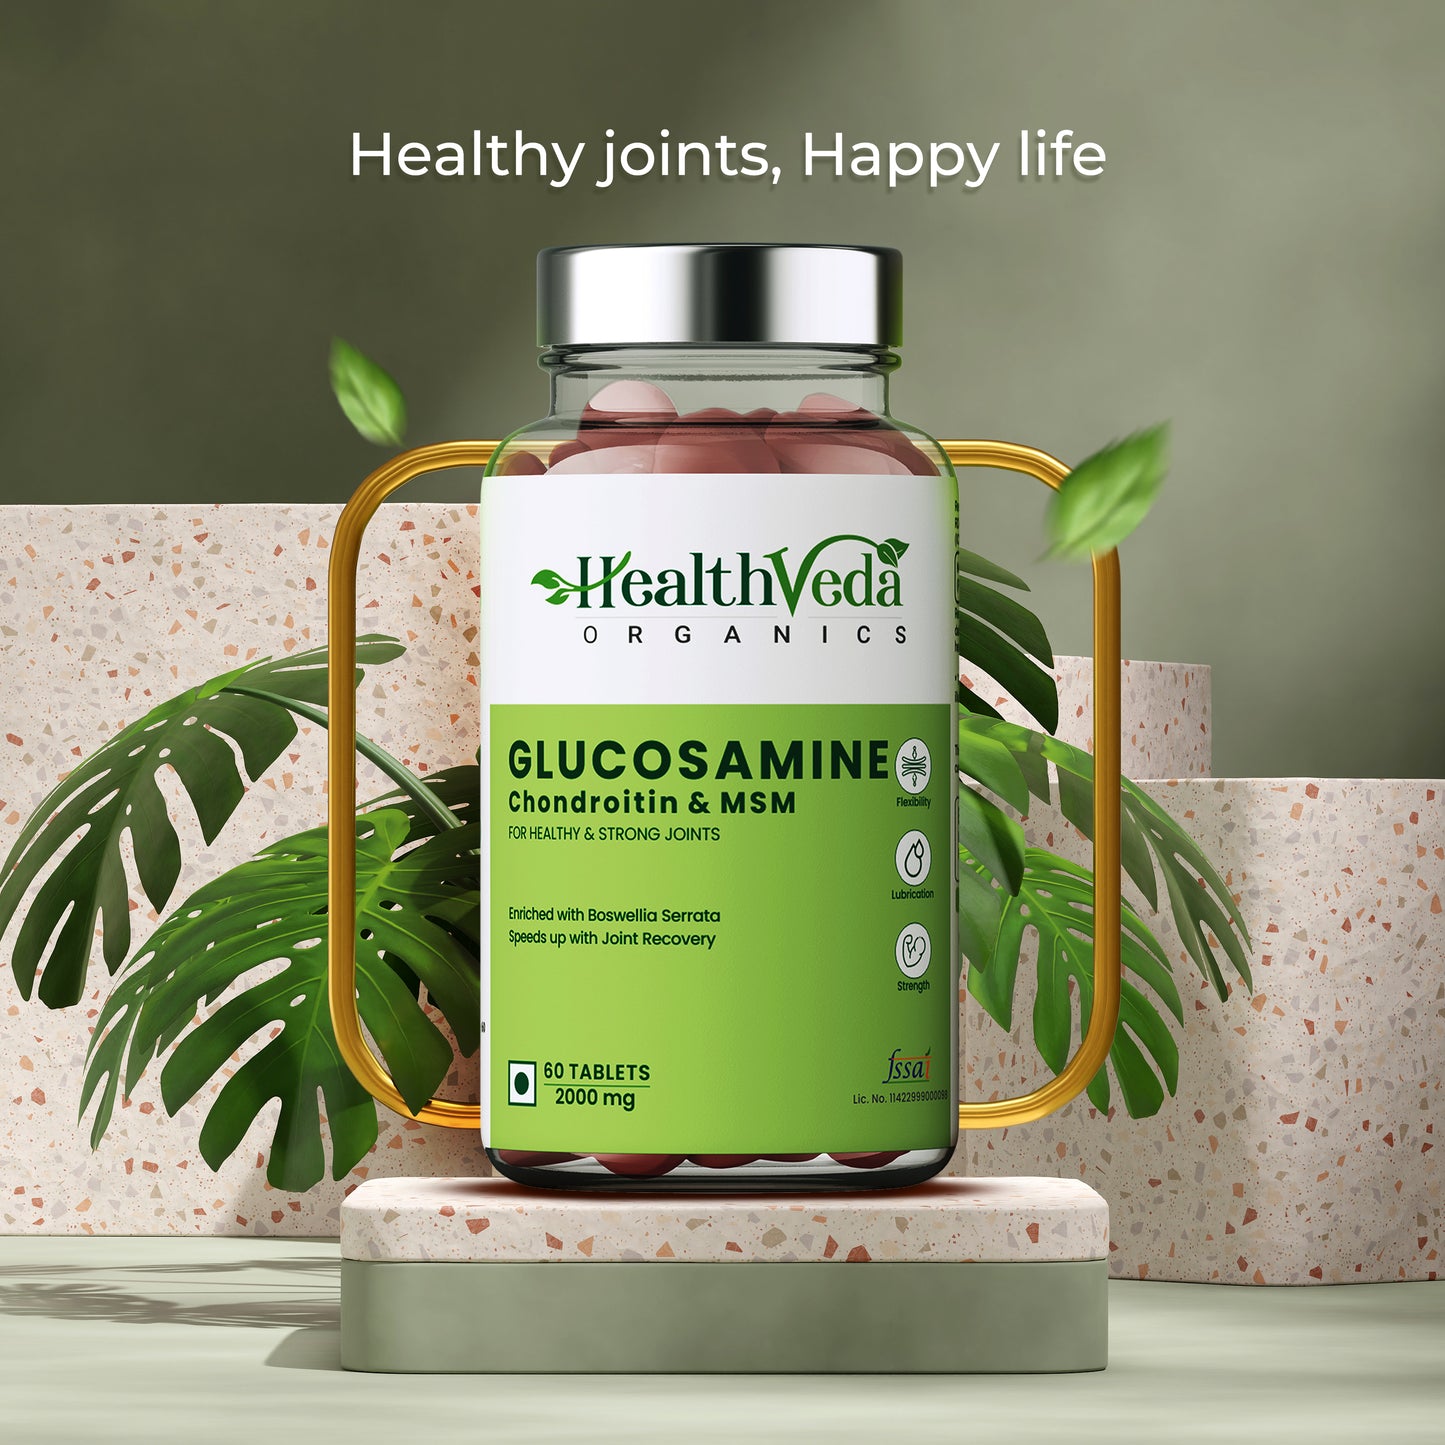 Health Veda Organics Glucosamine Chondroitin & MSM 2000 mg Supplement for  Healthy Joint, Bone & Cartilage - 60 Veg Tablets